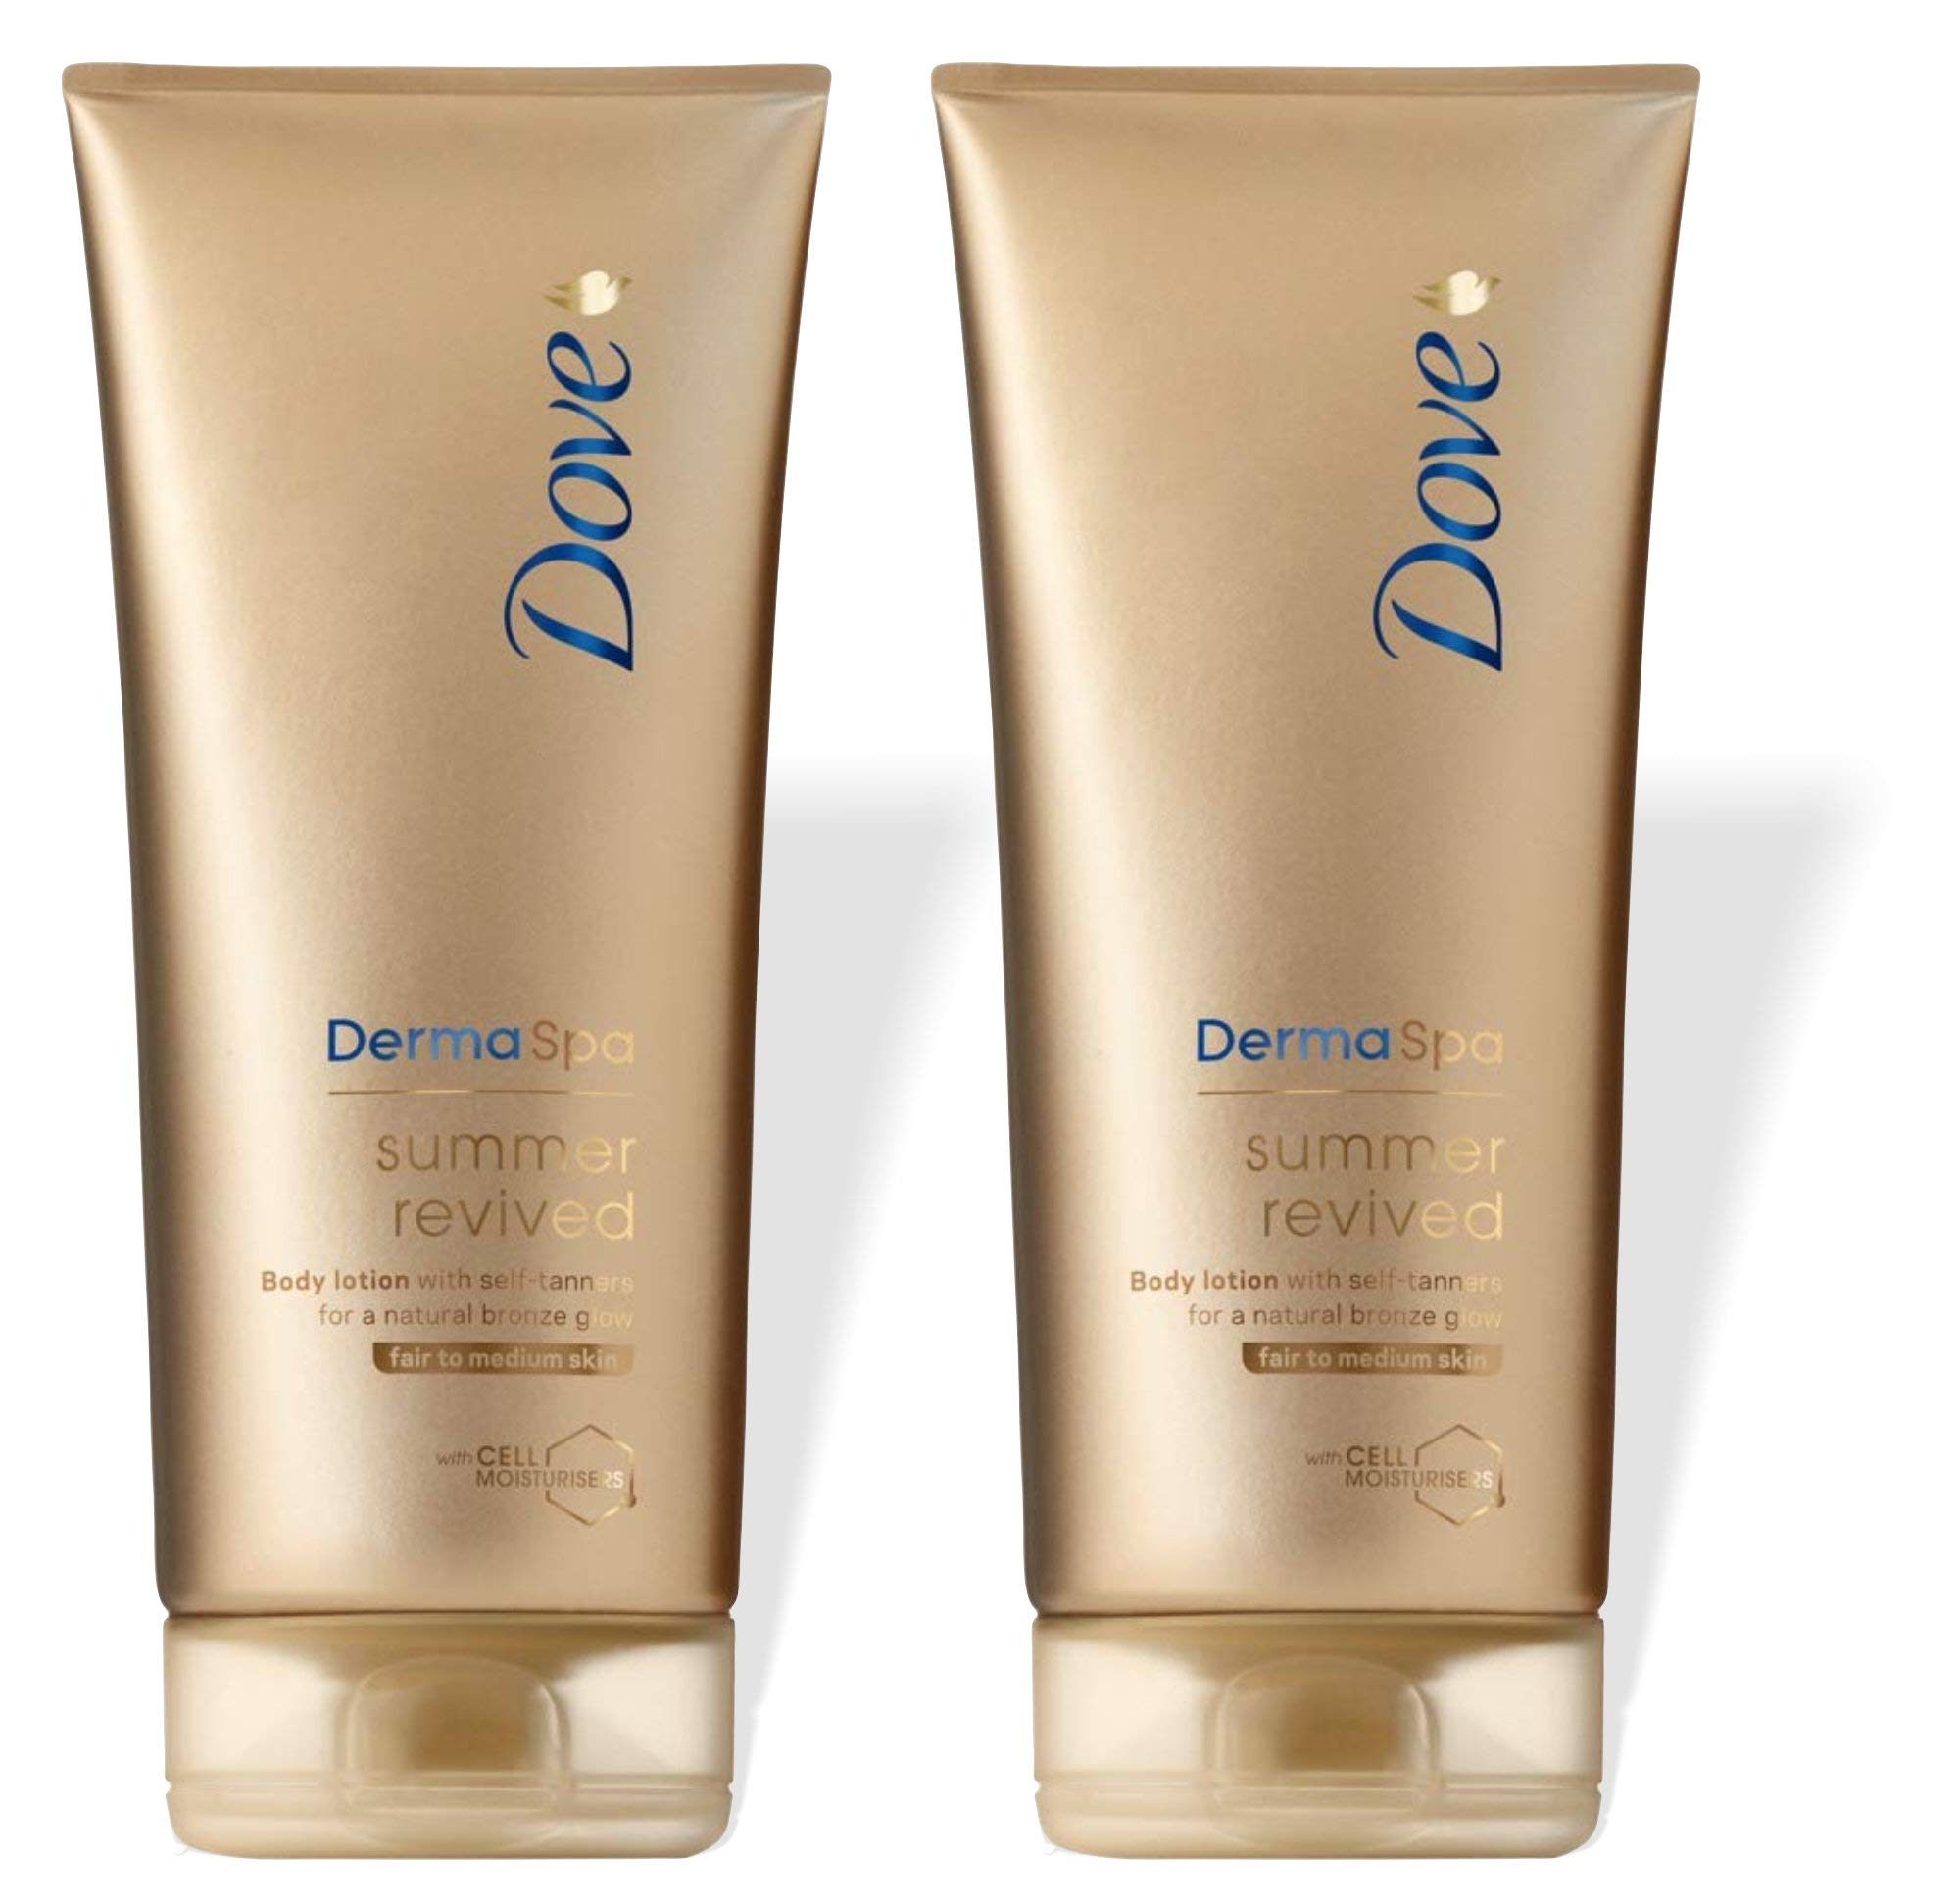 Dove Derma Spa Summer Revived Fair to Medium Skin Body Lotion 200ml (PACK OF 2)